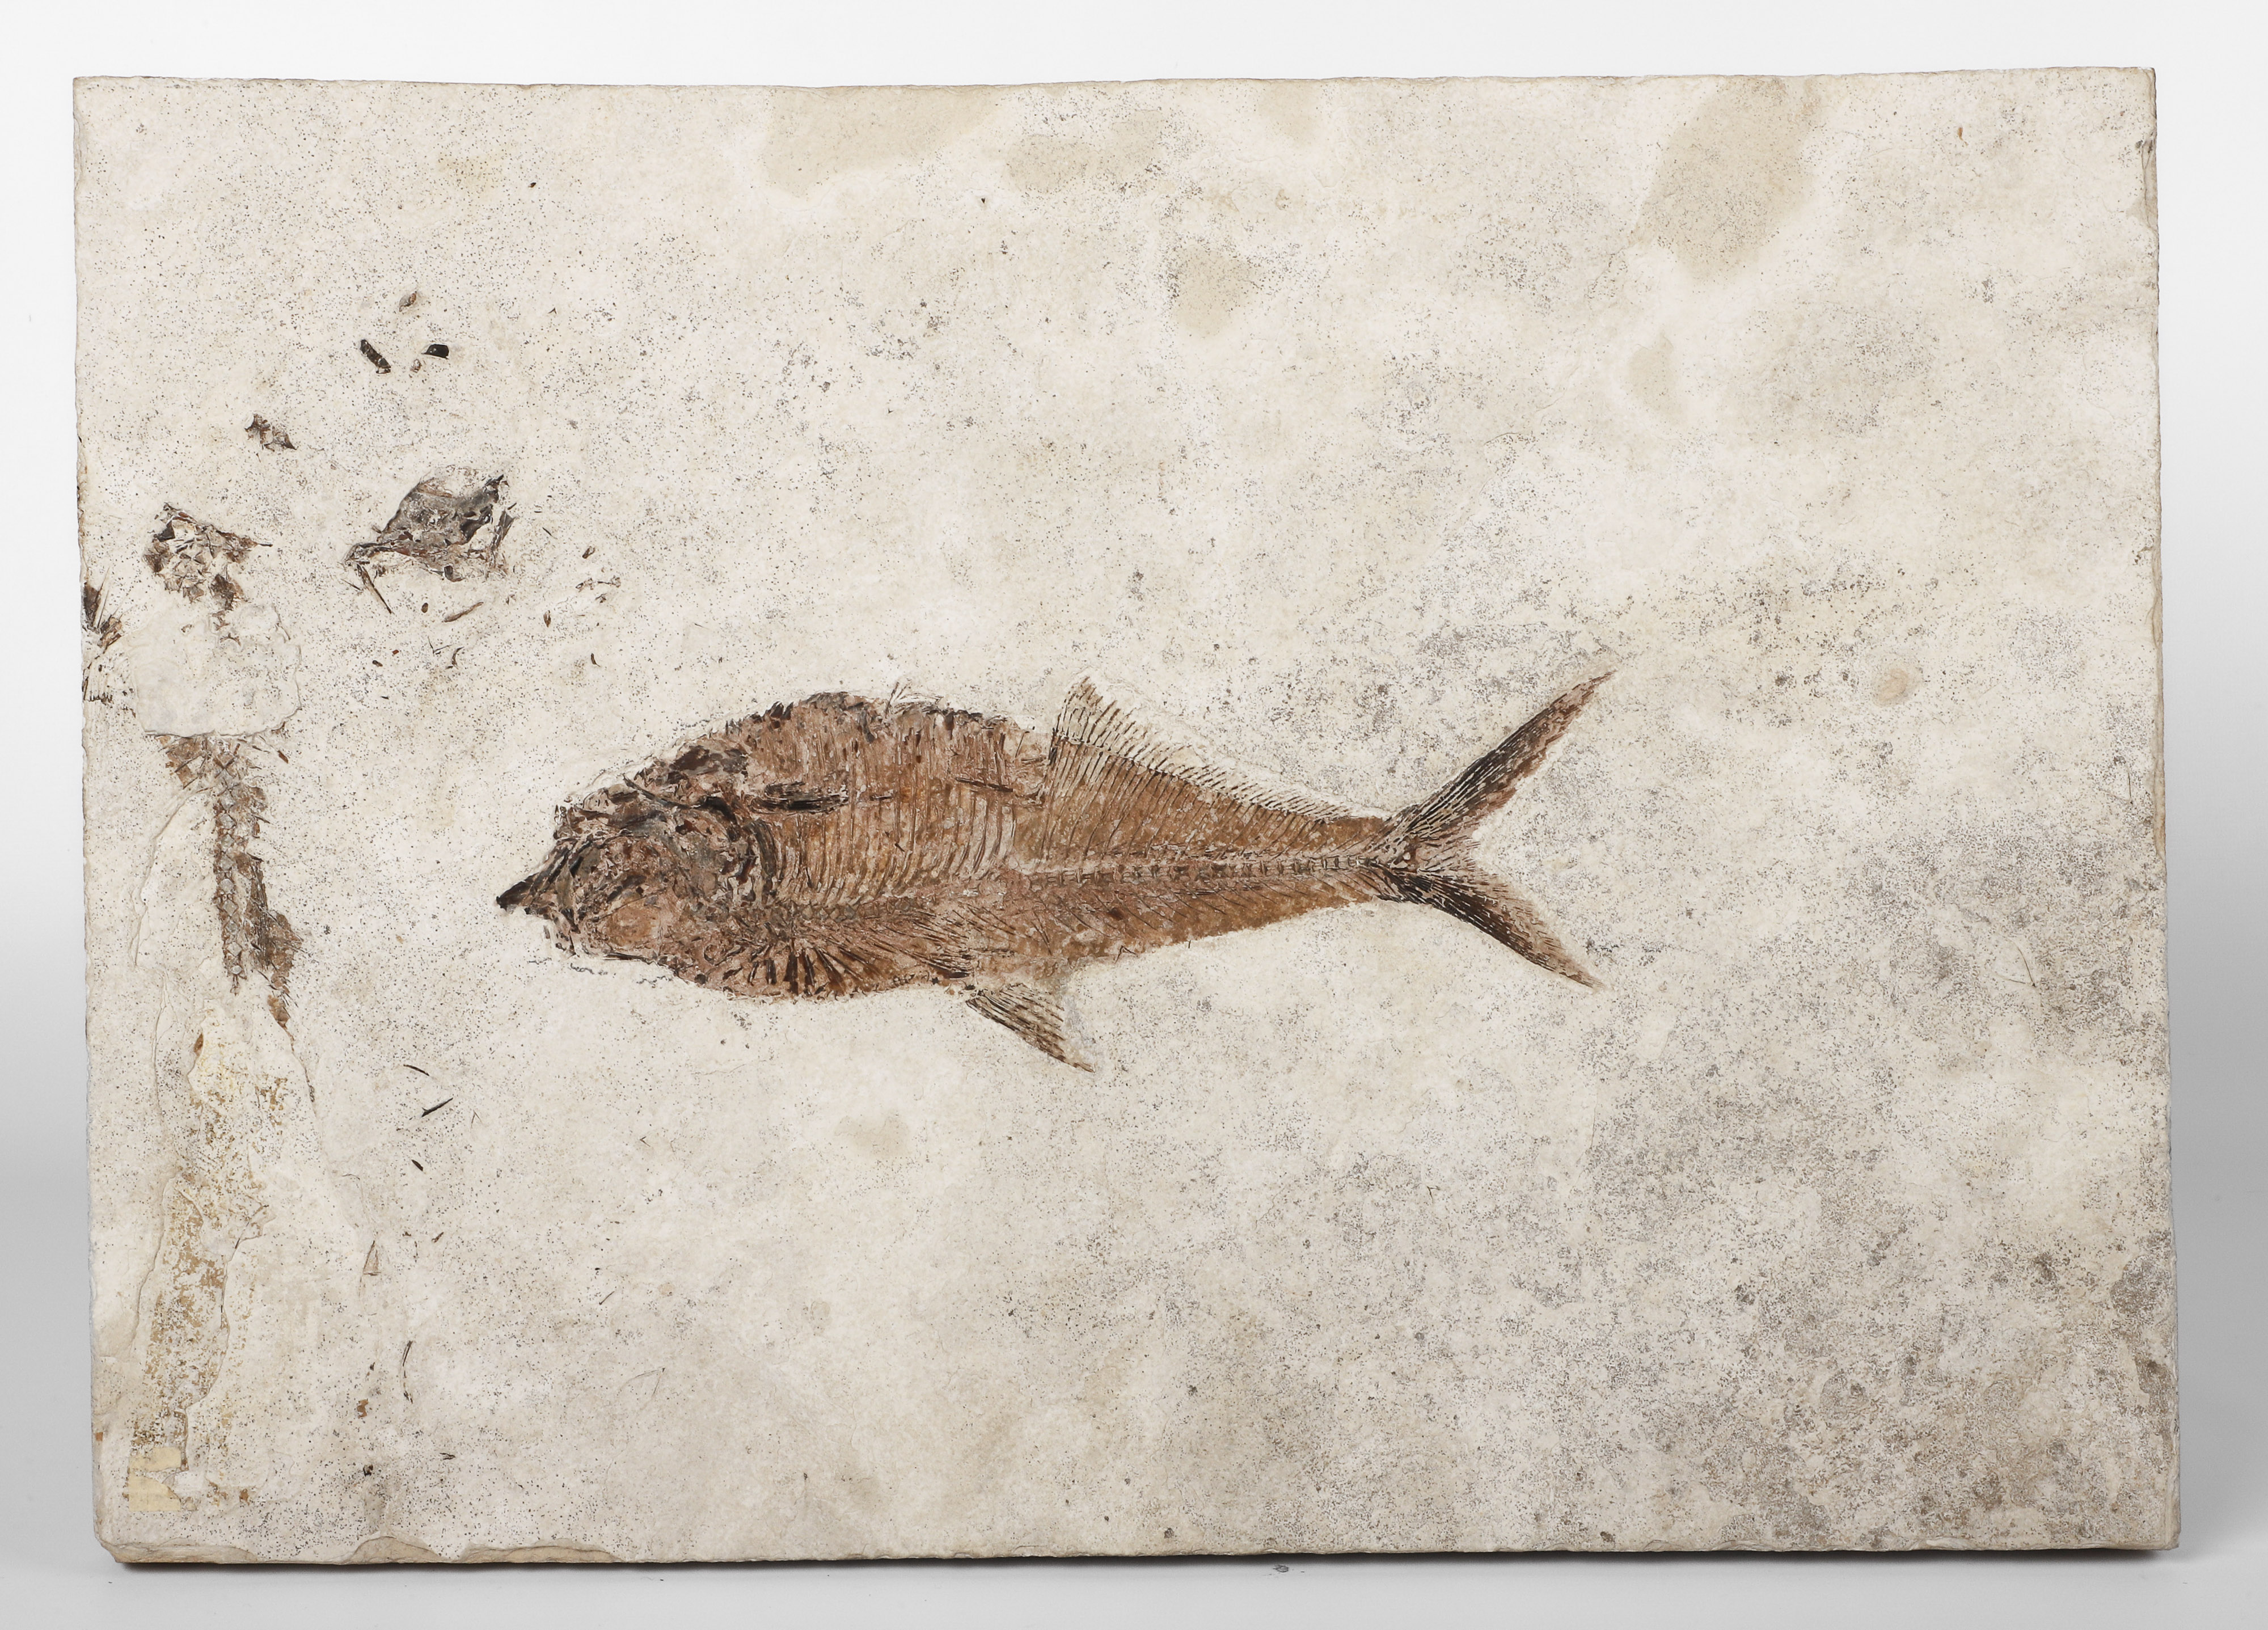 A Large Fossil of a Fish, Diplomystus